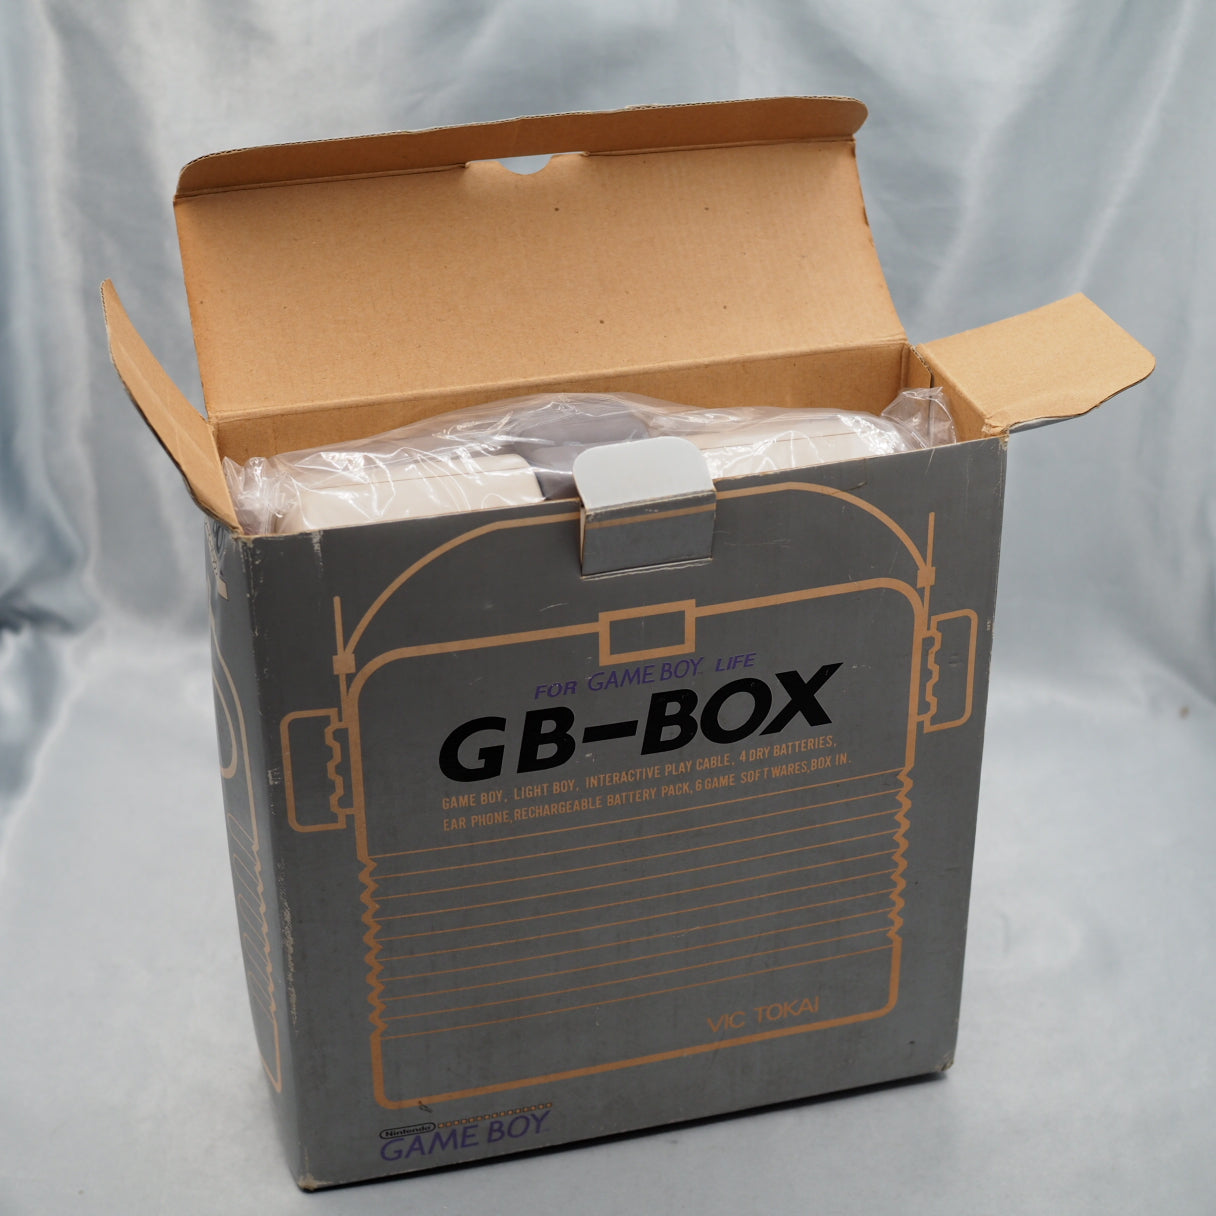 GB-BOX Case for GAME BOY